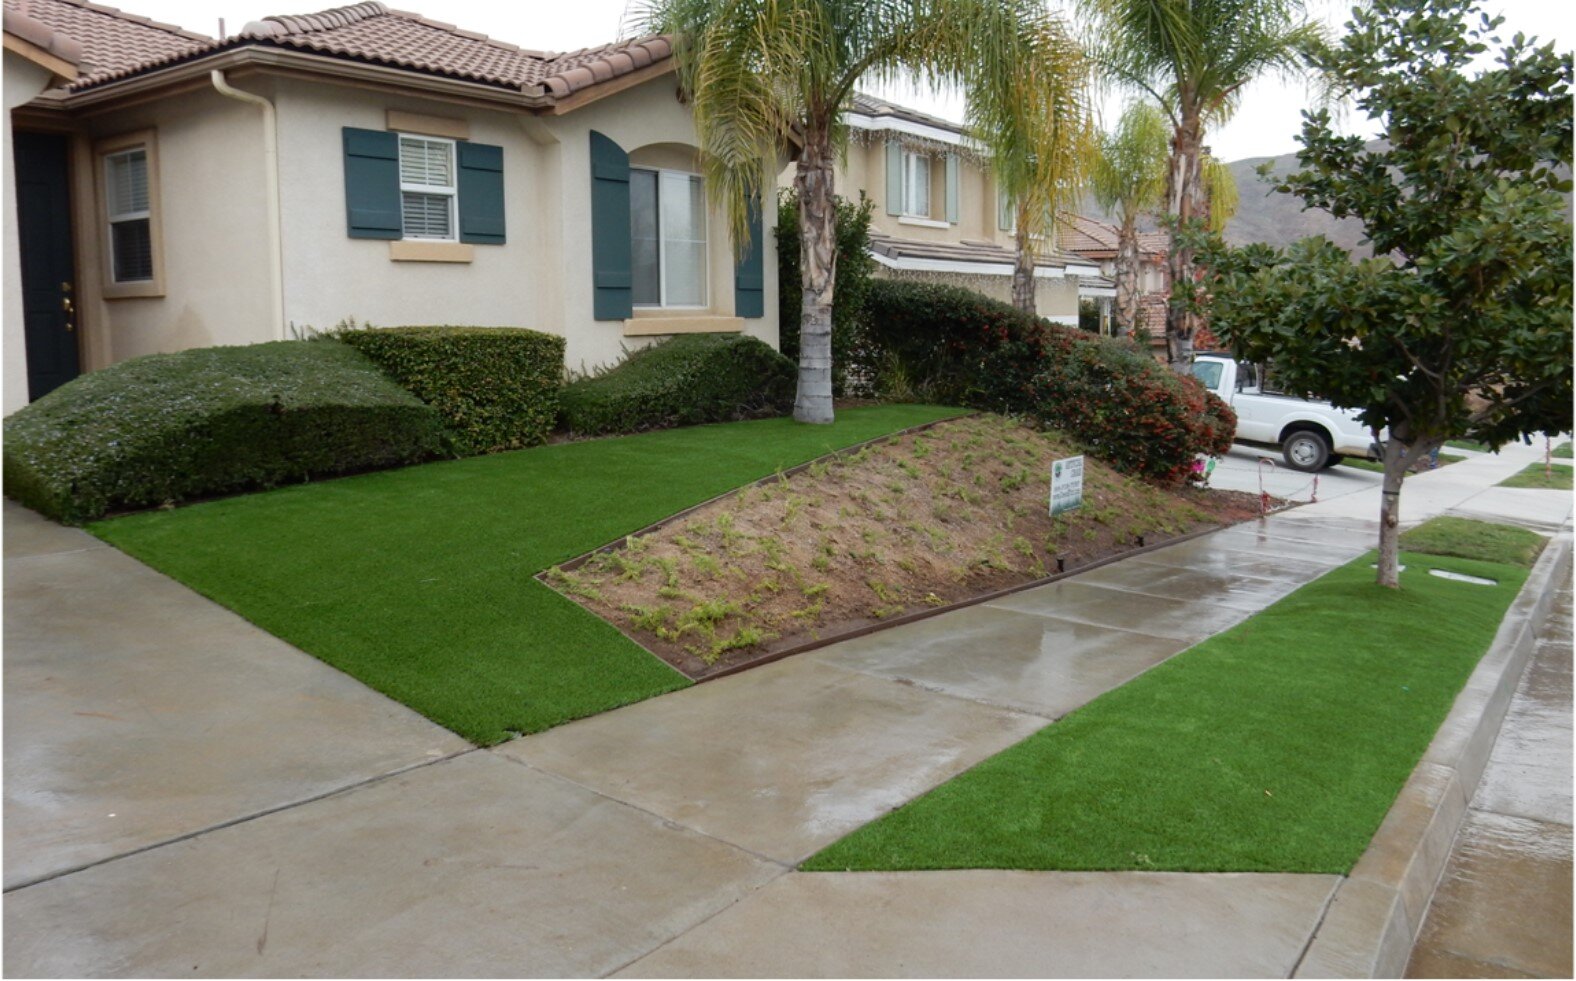 Lake Elsinore Artificial Grass Installation, GreenR Turf & Pavers Services